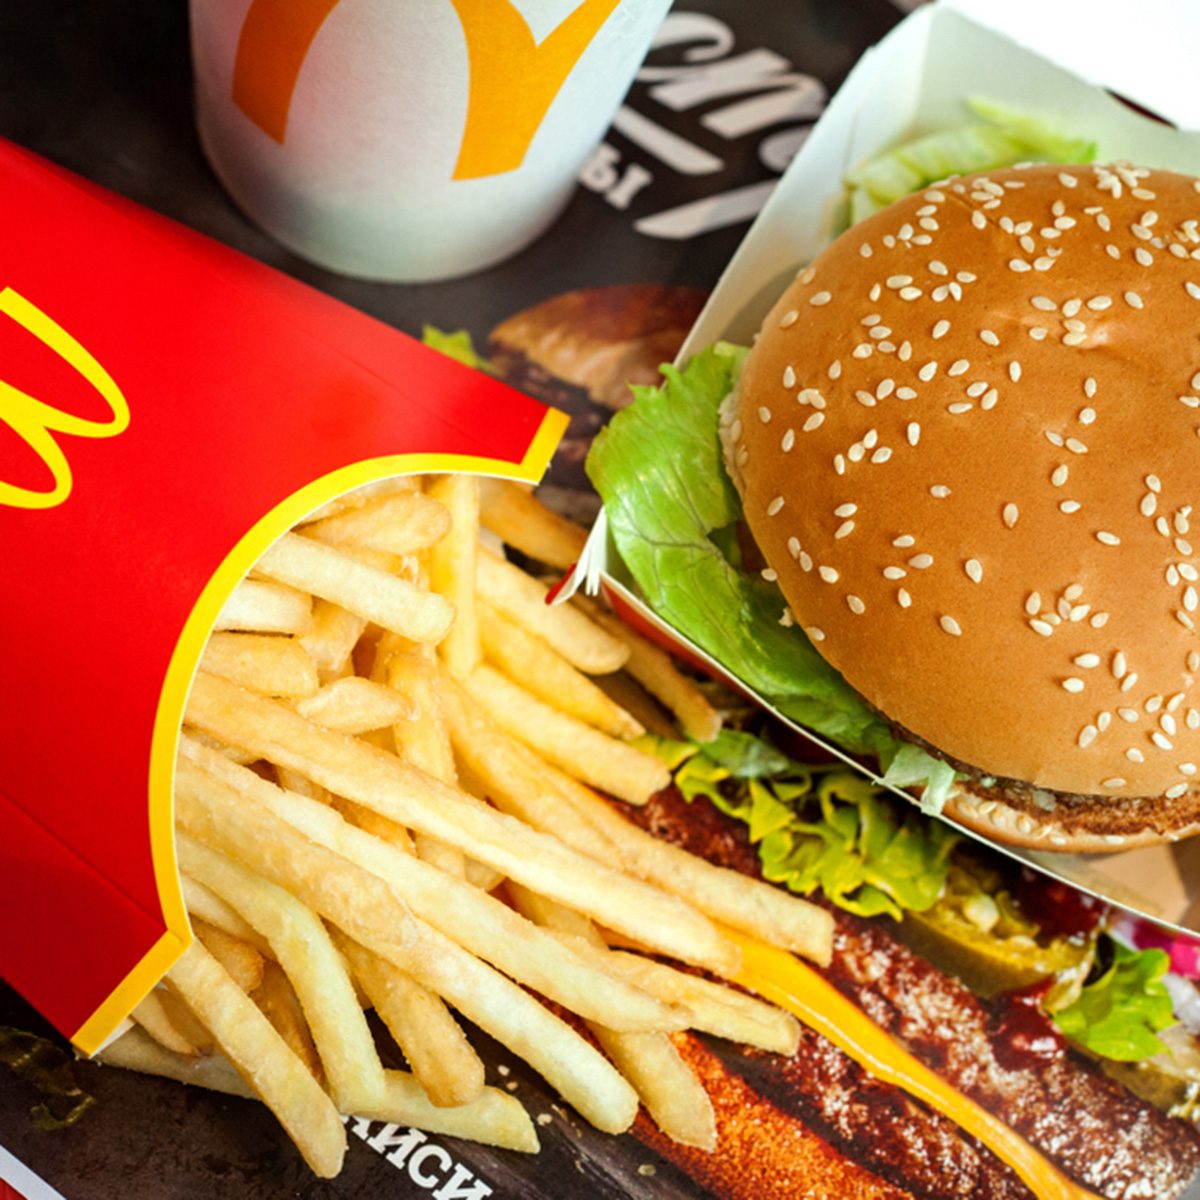 Flipboard: Here’s How to Make McDonald’s Special Sauce at Home